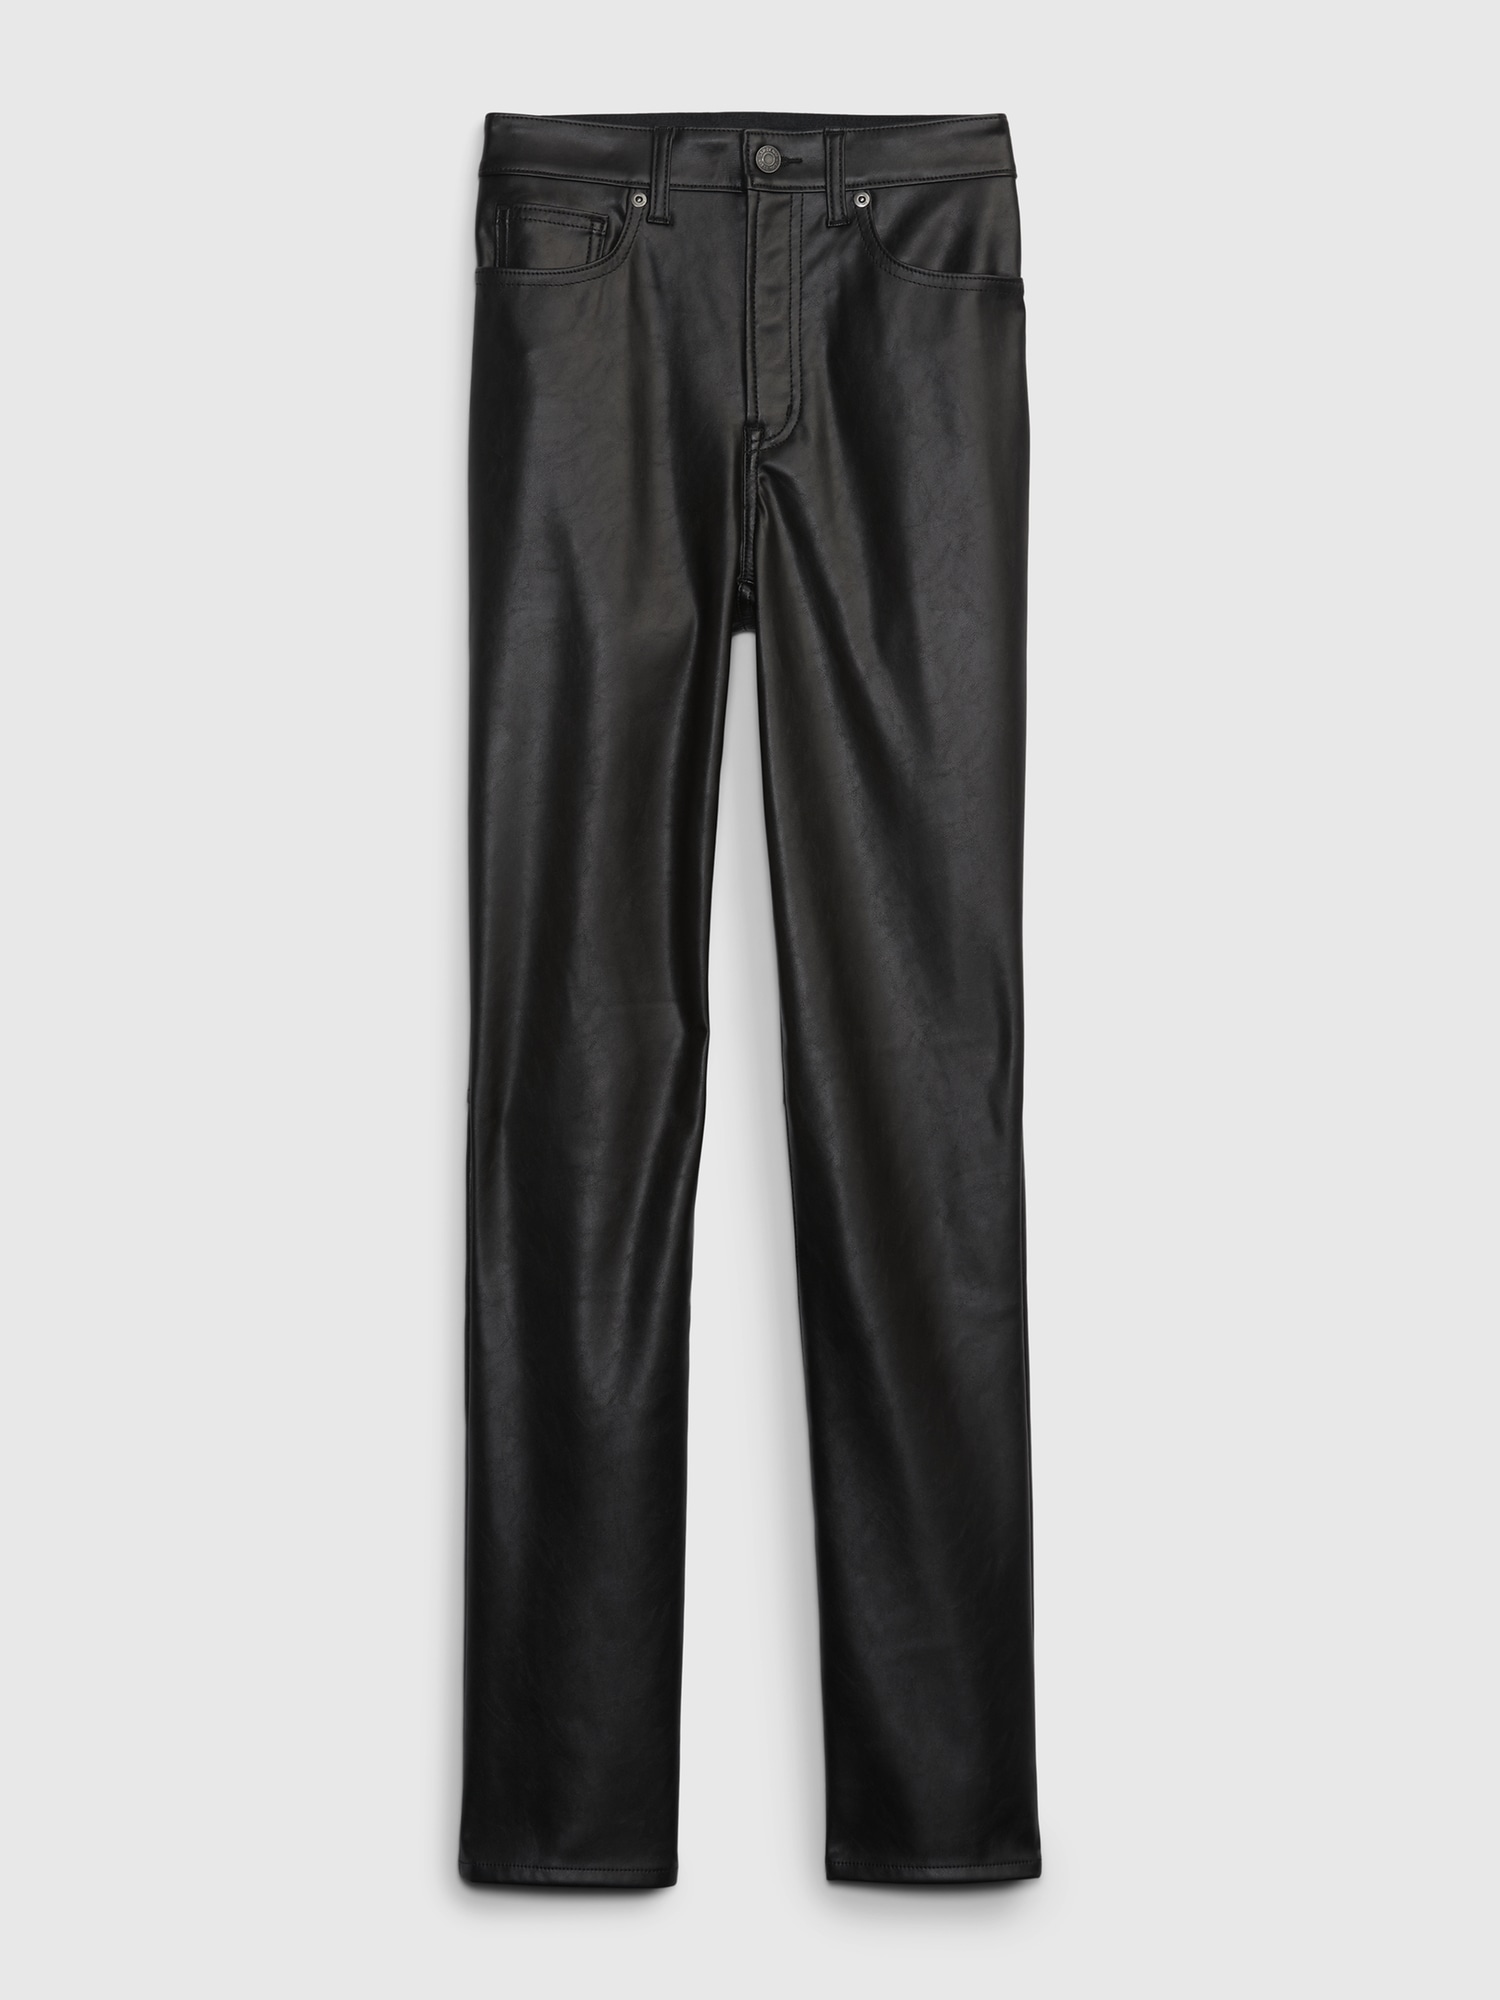 Buy Gap Faux-Leather Leggings from the Gap online shop